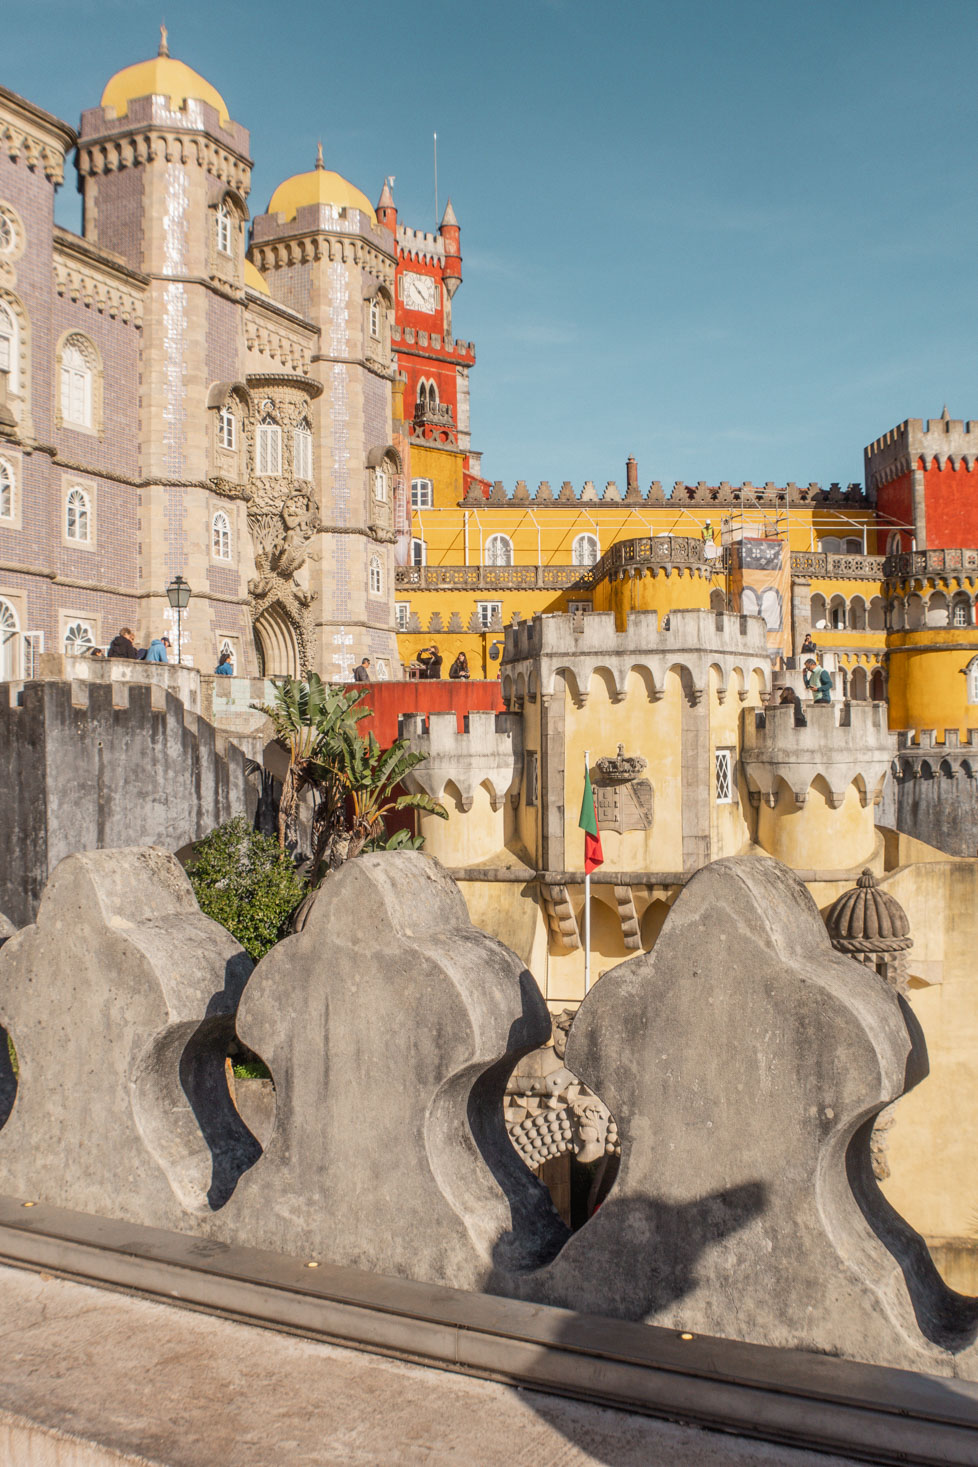 The Pena Palace in Sintra - Tickets and Practical Information